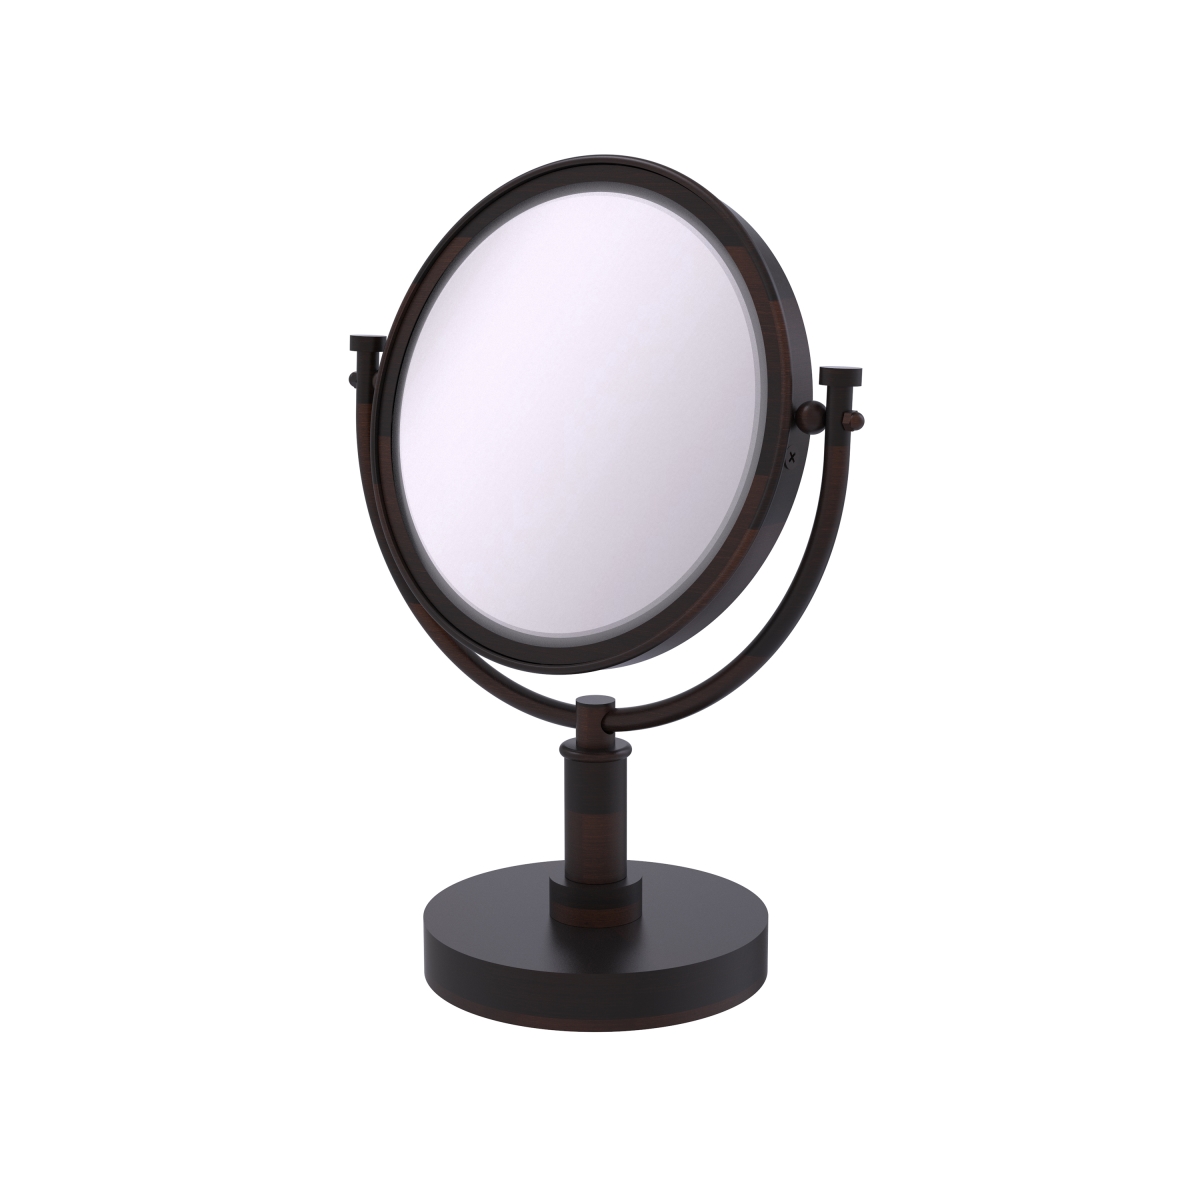 Picture of Allied Brass DM-4-5X-VB 8 in. Vanity Top Make-Up Mirror 5X Magnification, Venetian Bronze - 15 x 8 x 8 in.